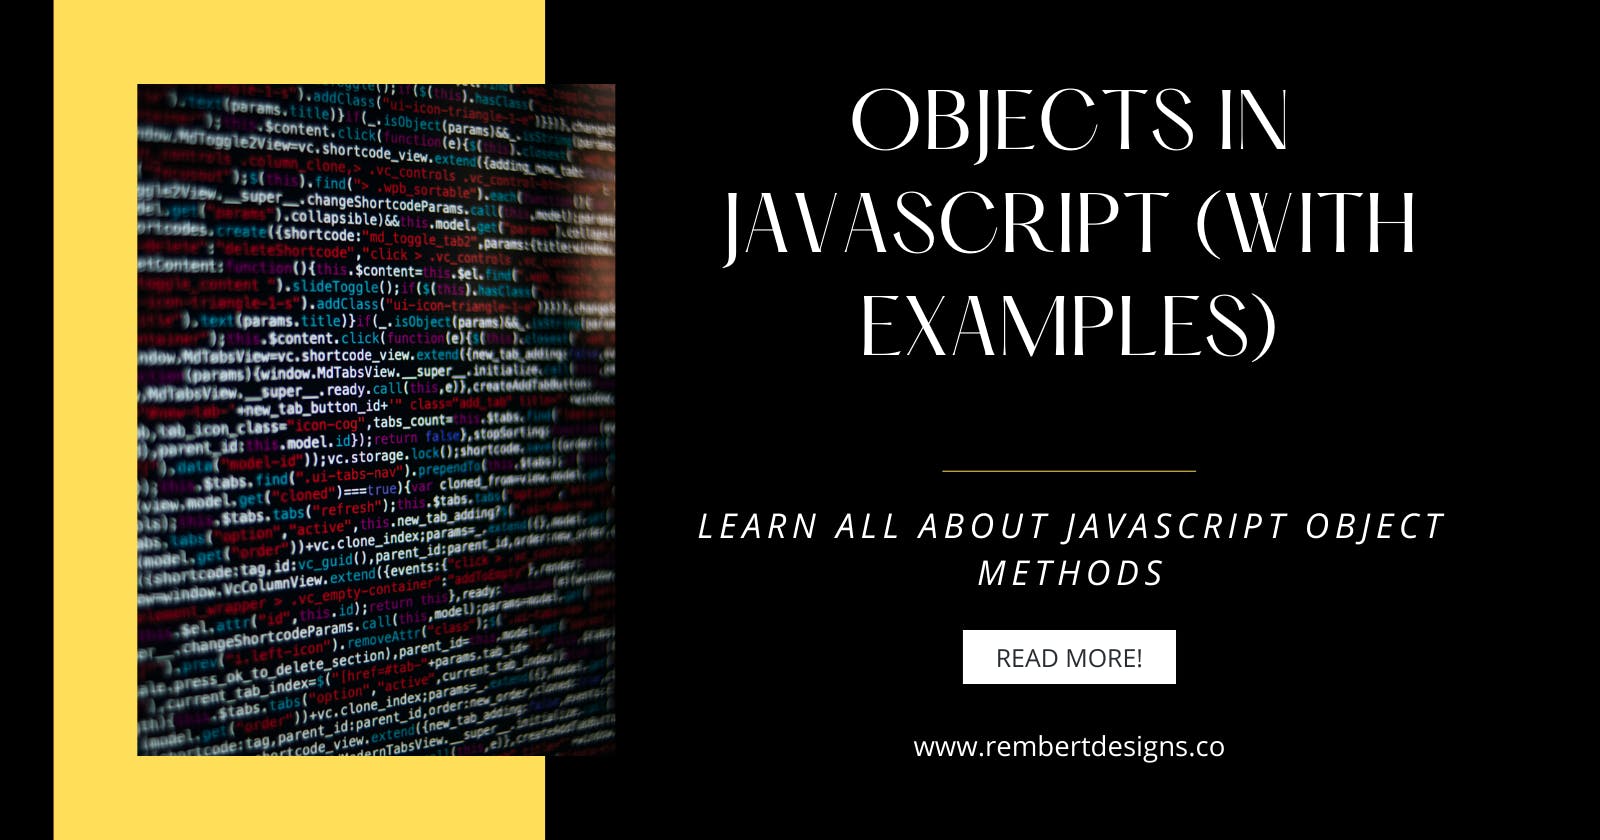 Objects in JavaScript (With Examples)